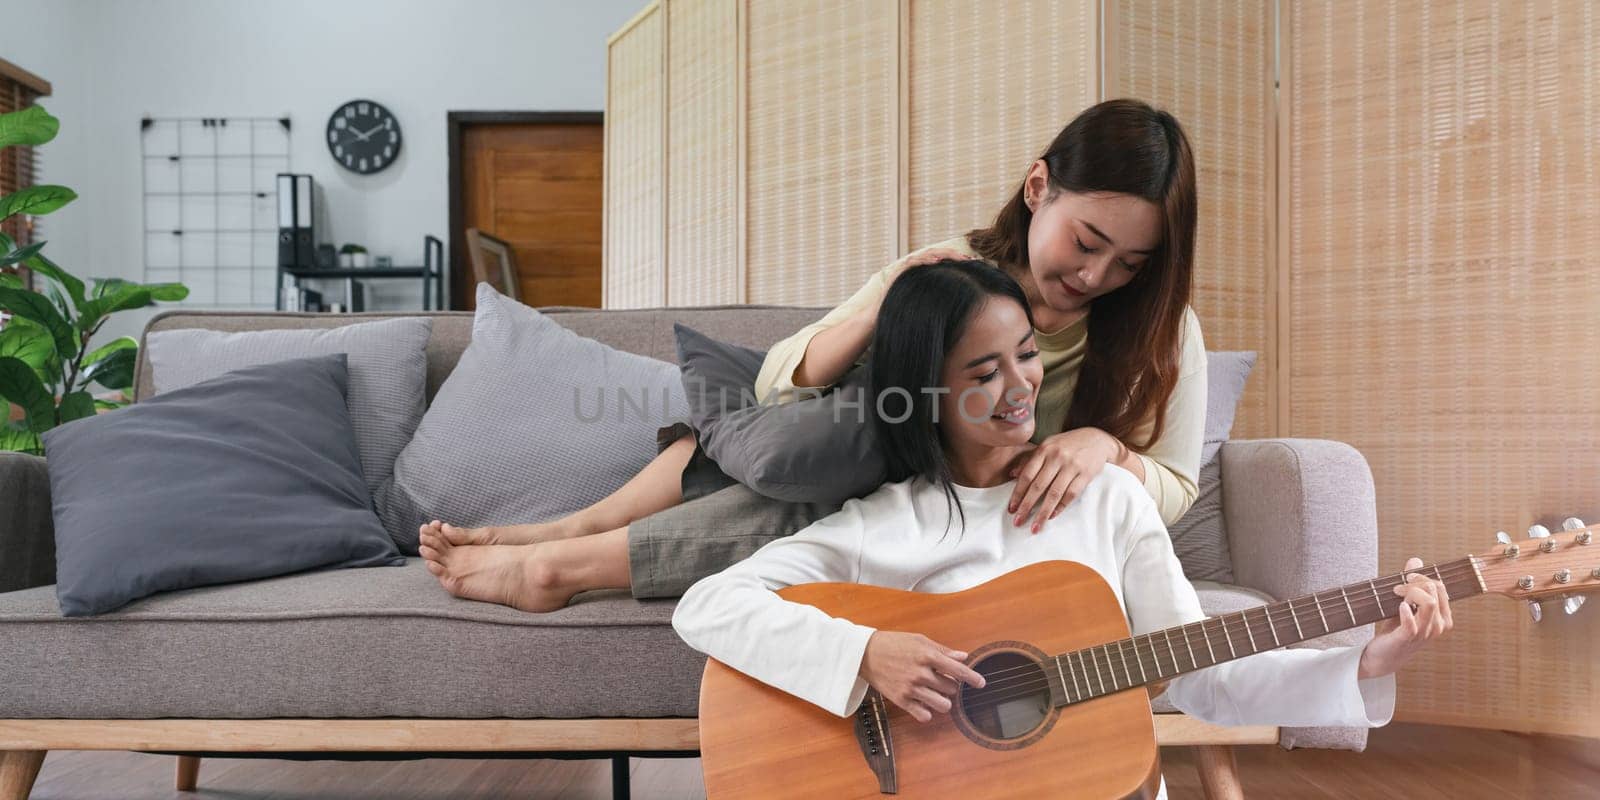 Homosexual LGBT. lesbian couple together concept. Couple of young women playing guitar and singing in living room with happiness moment by nateemee